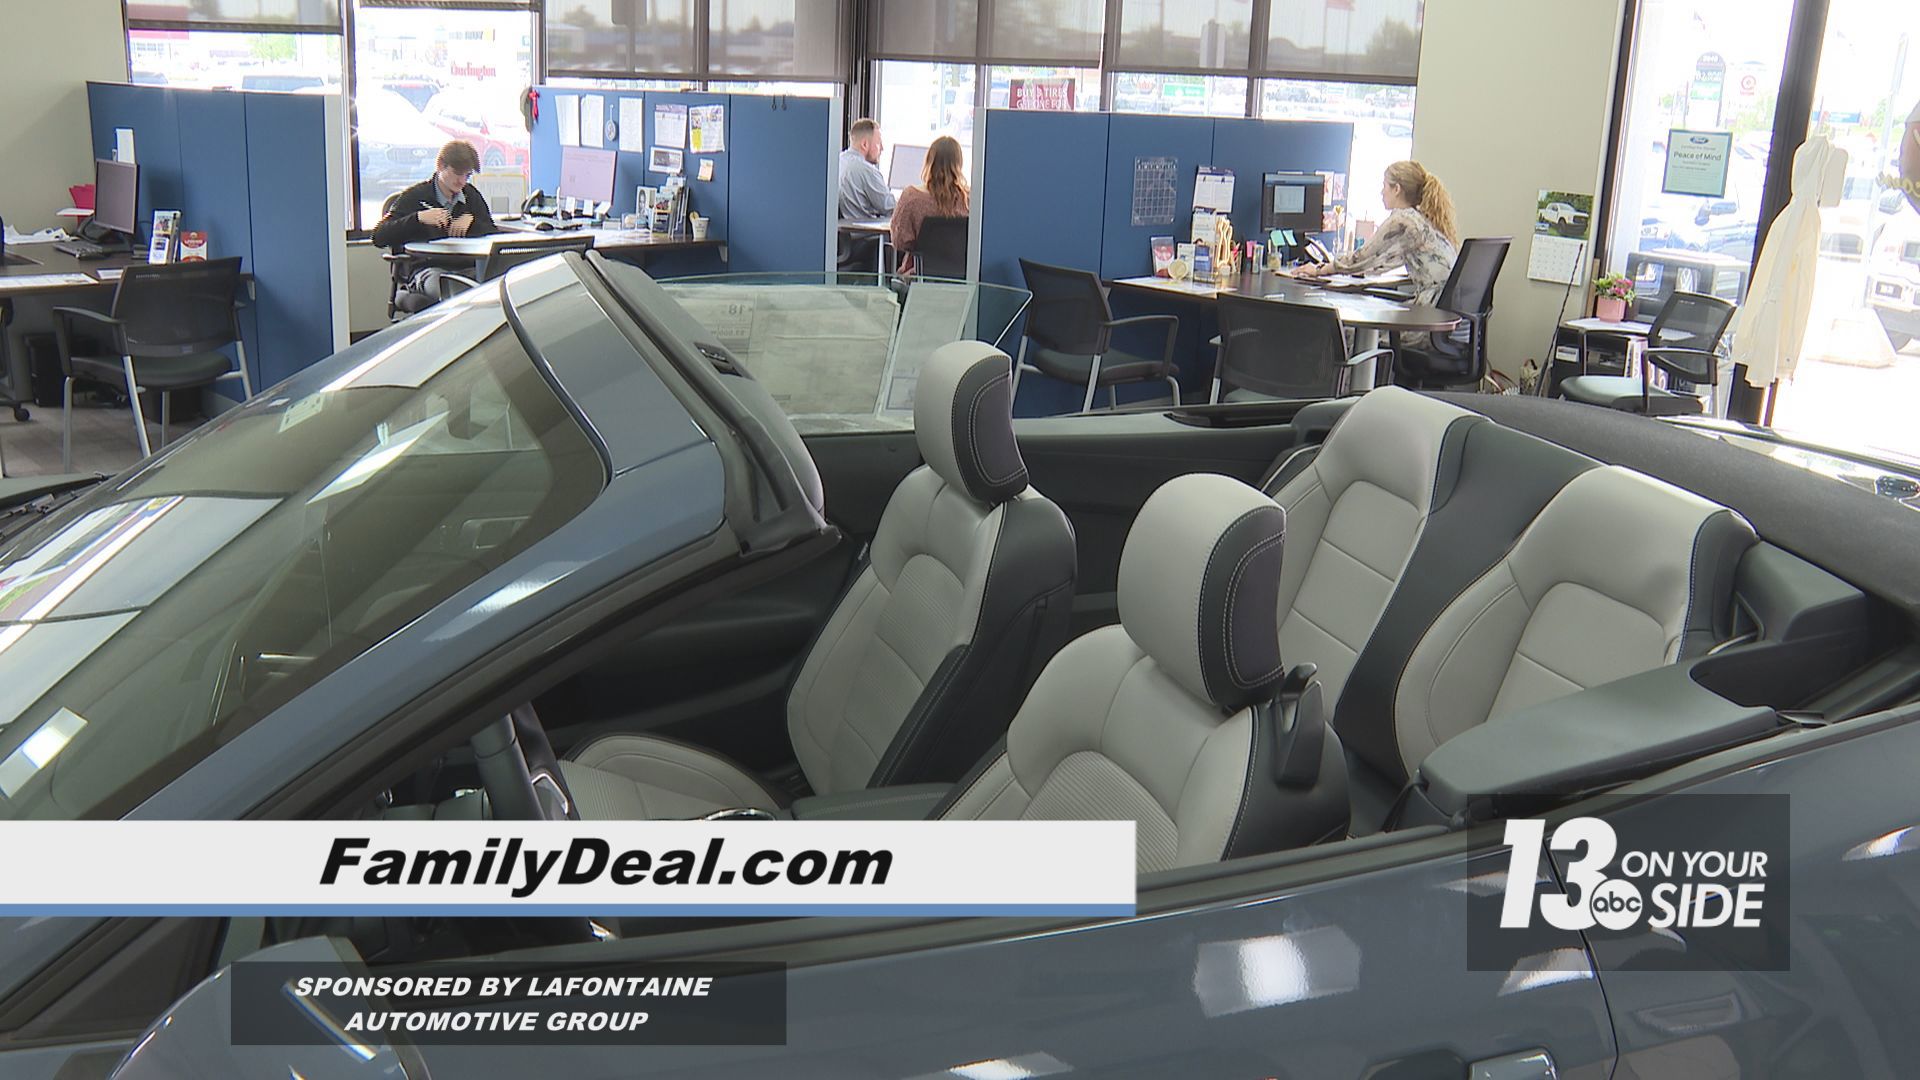 LaFontaine Automotive Group is a family-owned operation with the goal of treating their customers like they’re family, too.